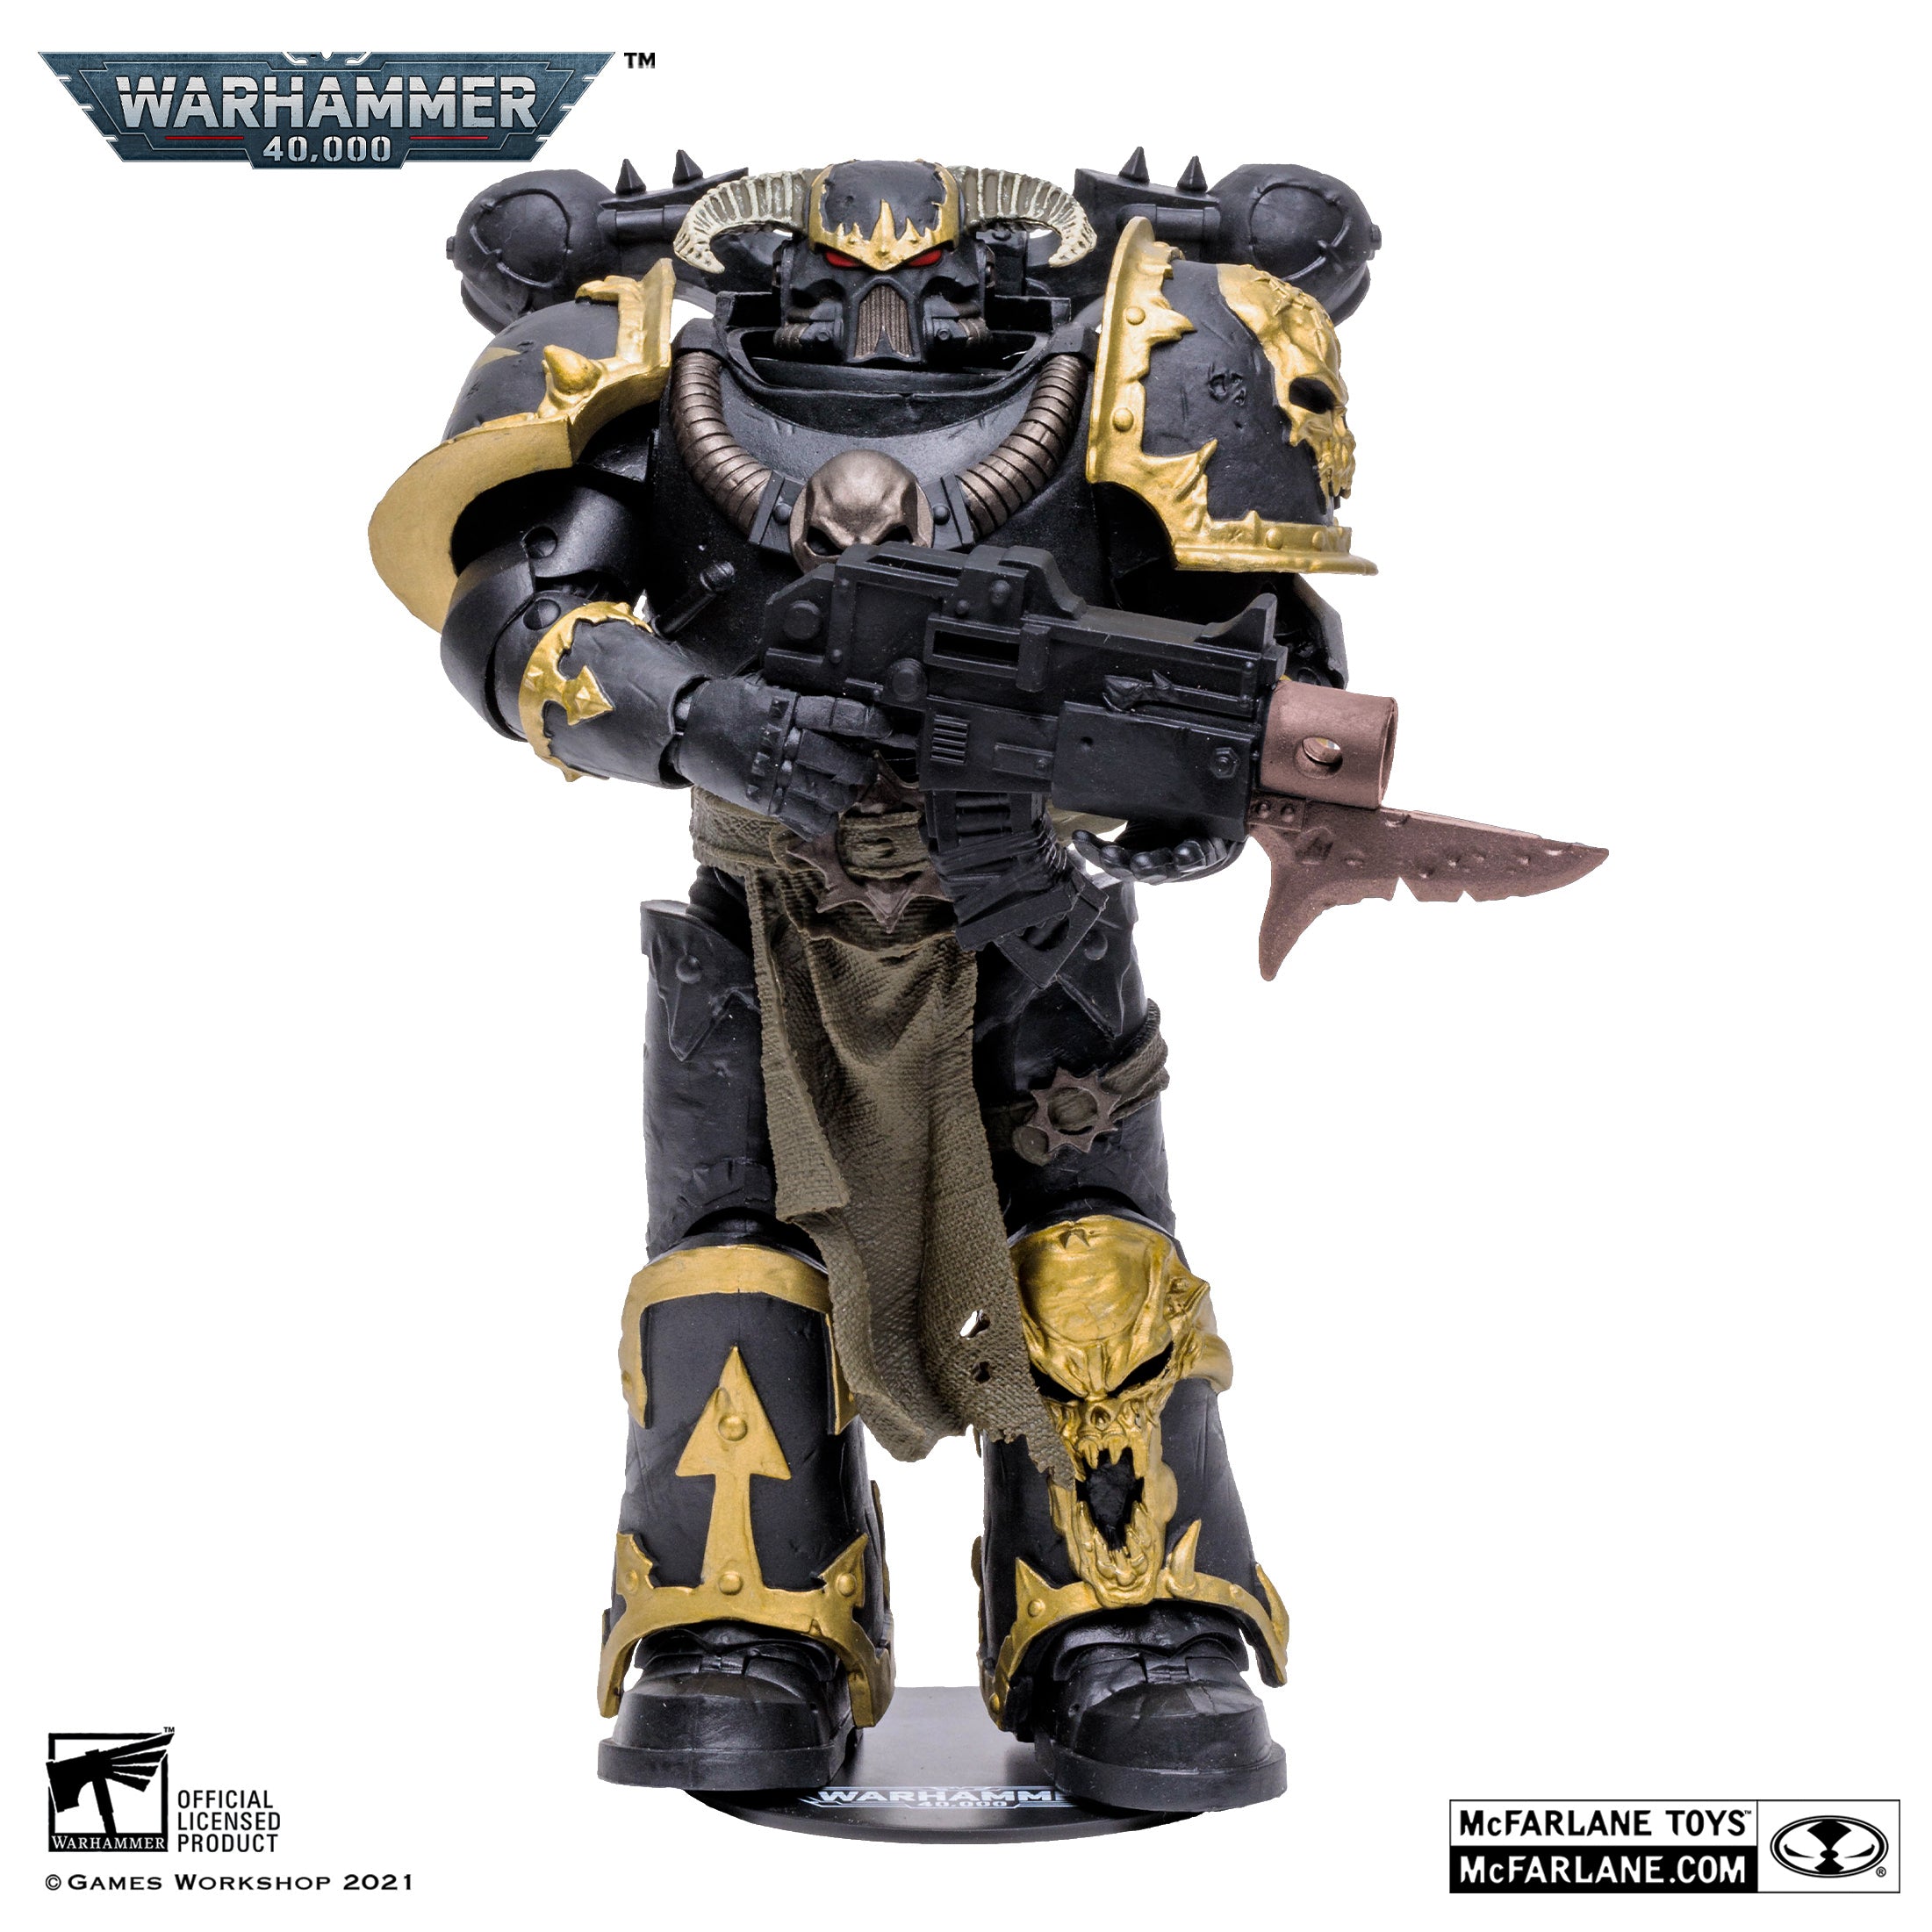  McFarlane Toys Warhammer 40000 7IN Figures WV6 - Chaos Space  Marine (Word Bearer)(Gold Label) : Toys & Games